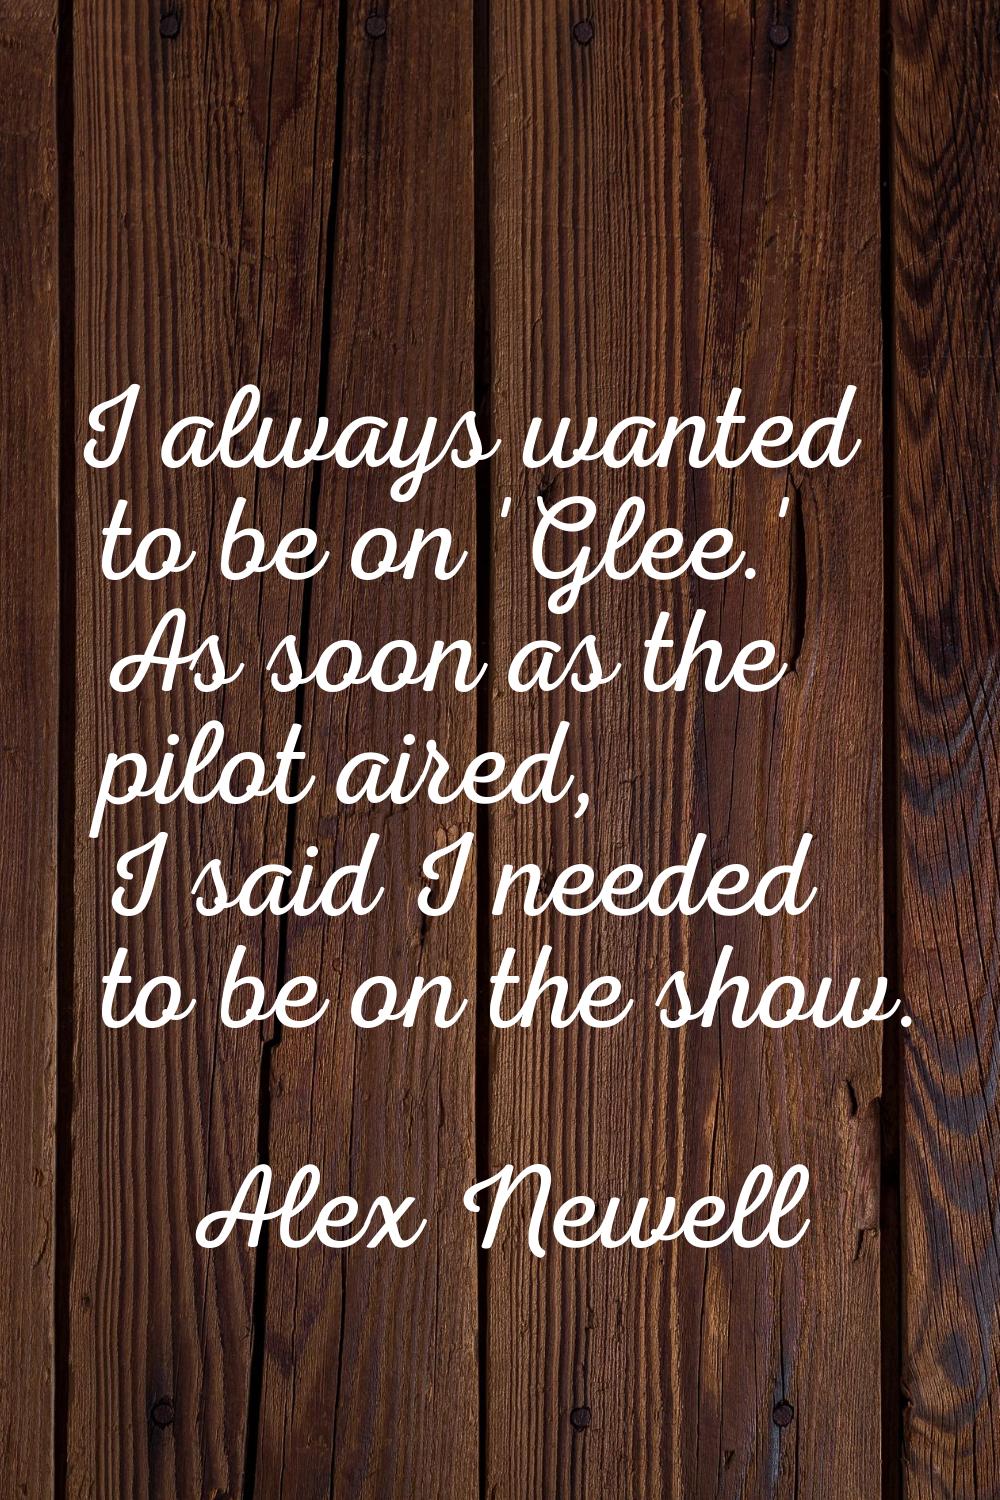 I always wanted to be on 'Glee.' As soon as the pilot aired, I said I needed to be on the show.